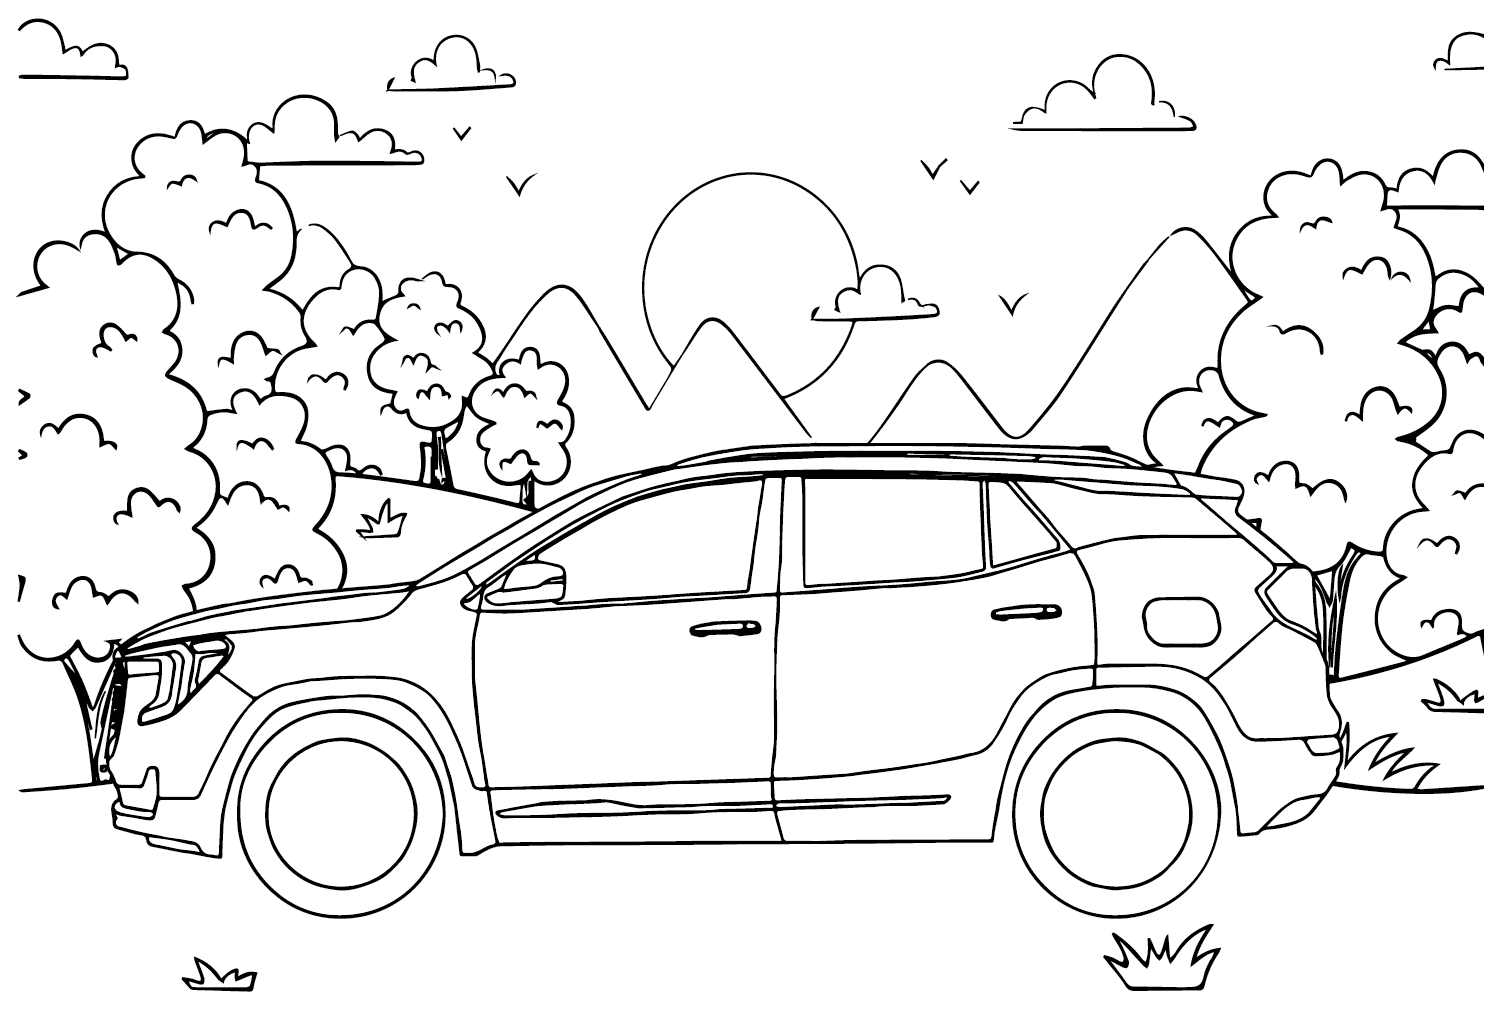 GMC Terrain Dimensions Coloring Page from GMC